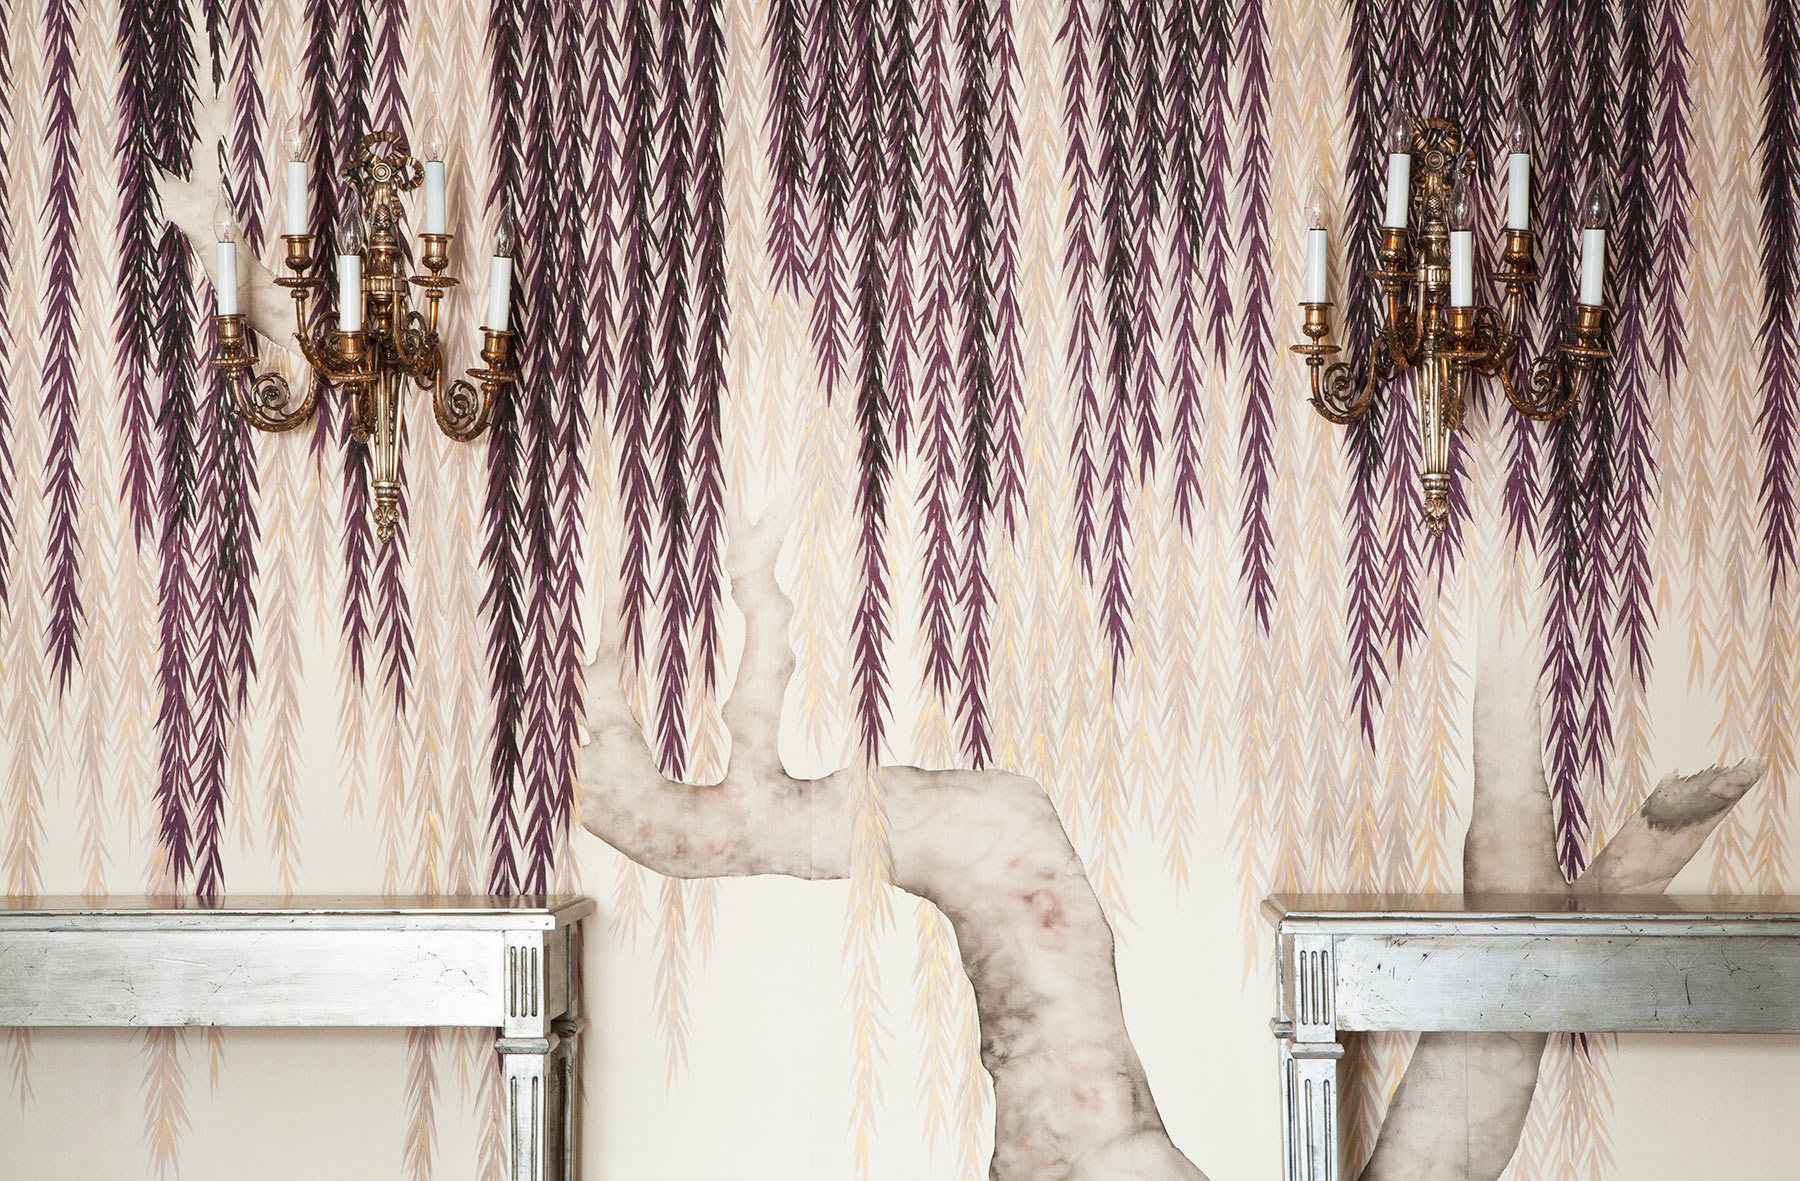 'Willow' in Boysenberry design colours on Bleached White dyed silk